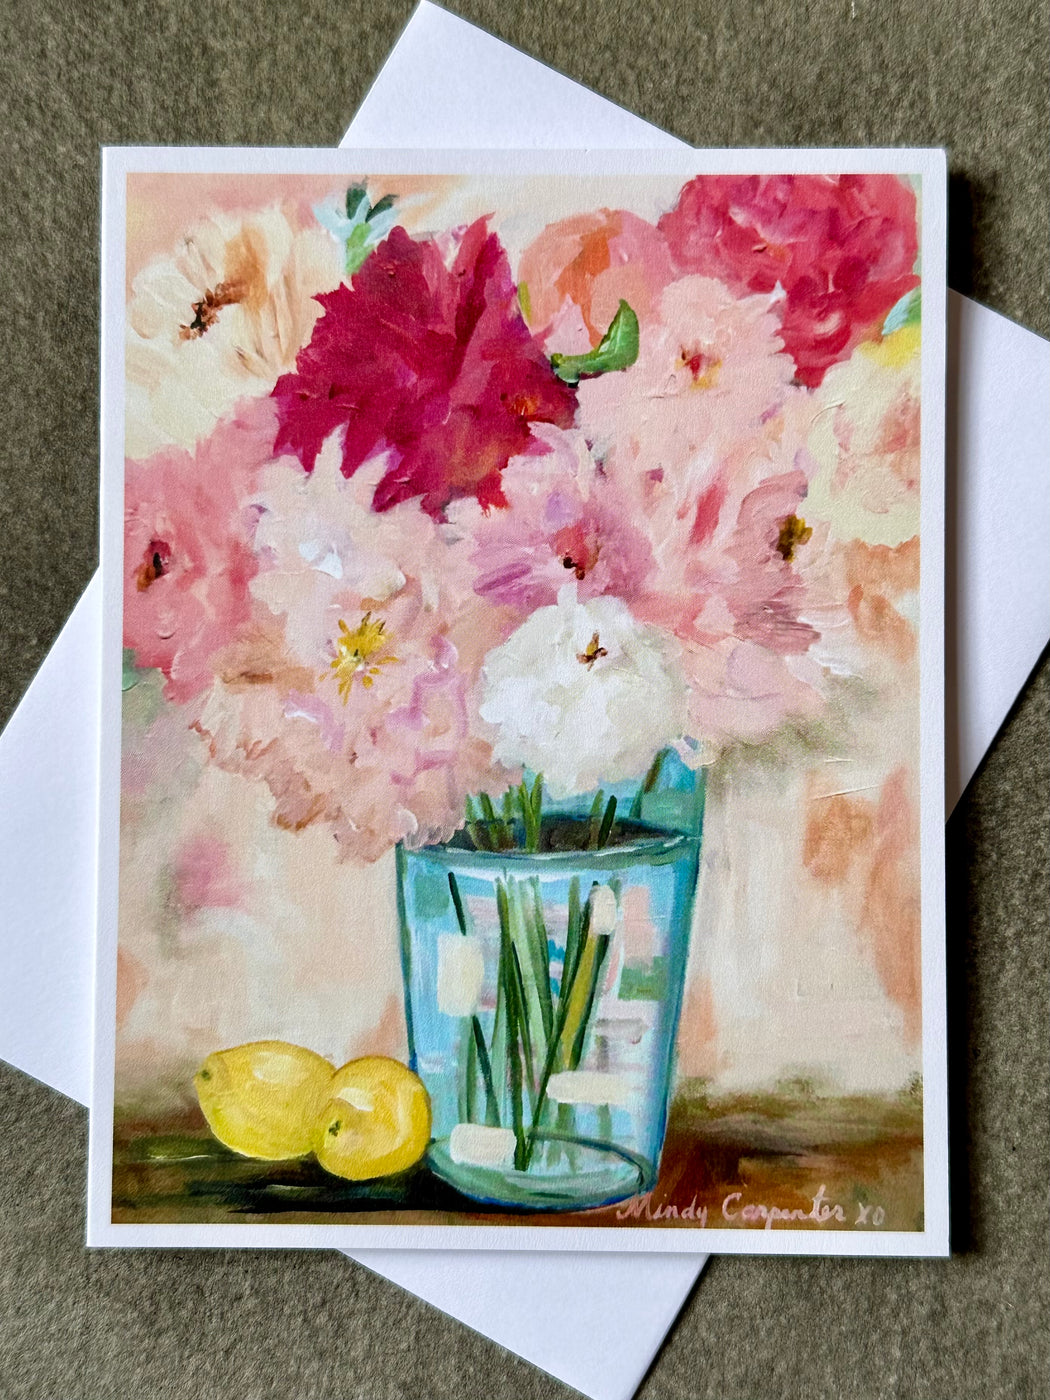 "Peonies" Card by Mindy Carpenter